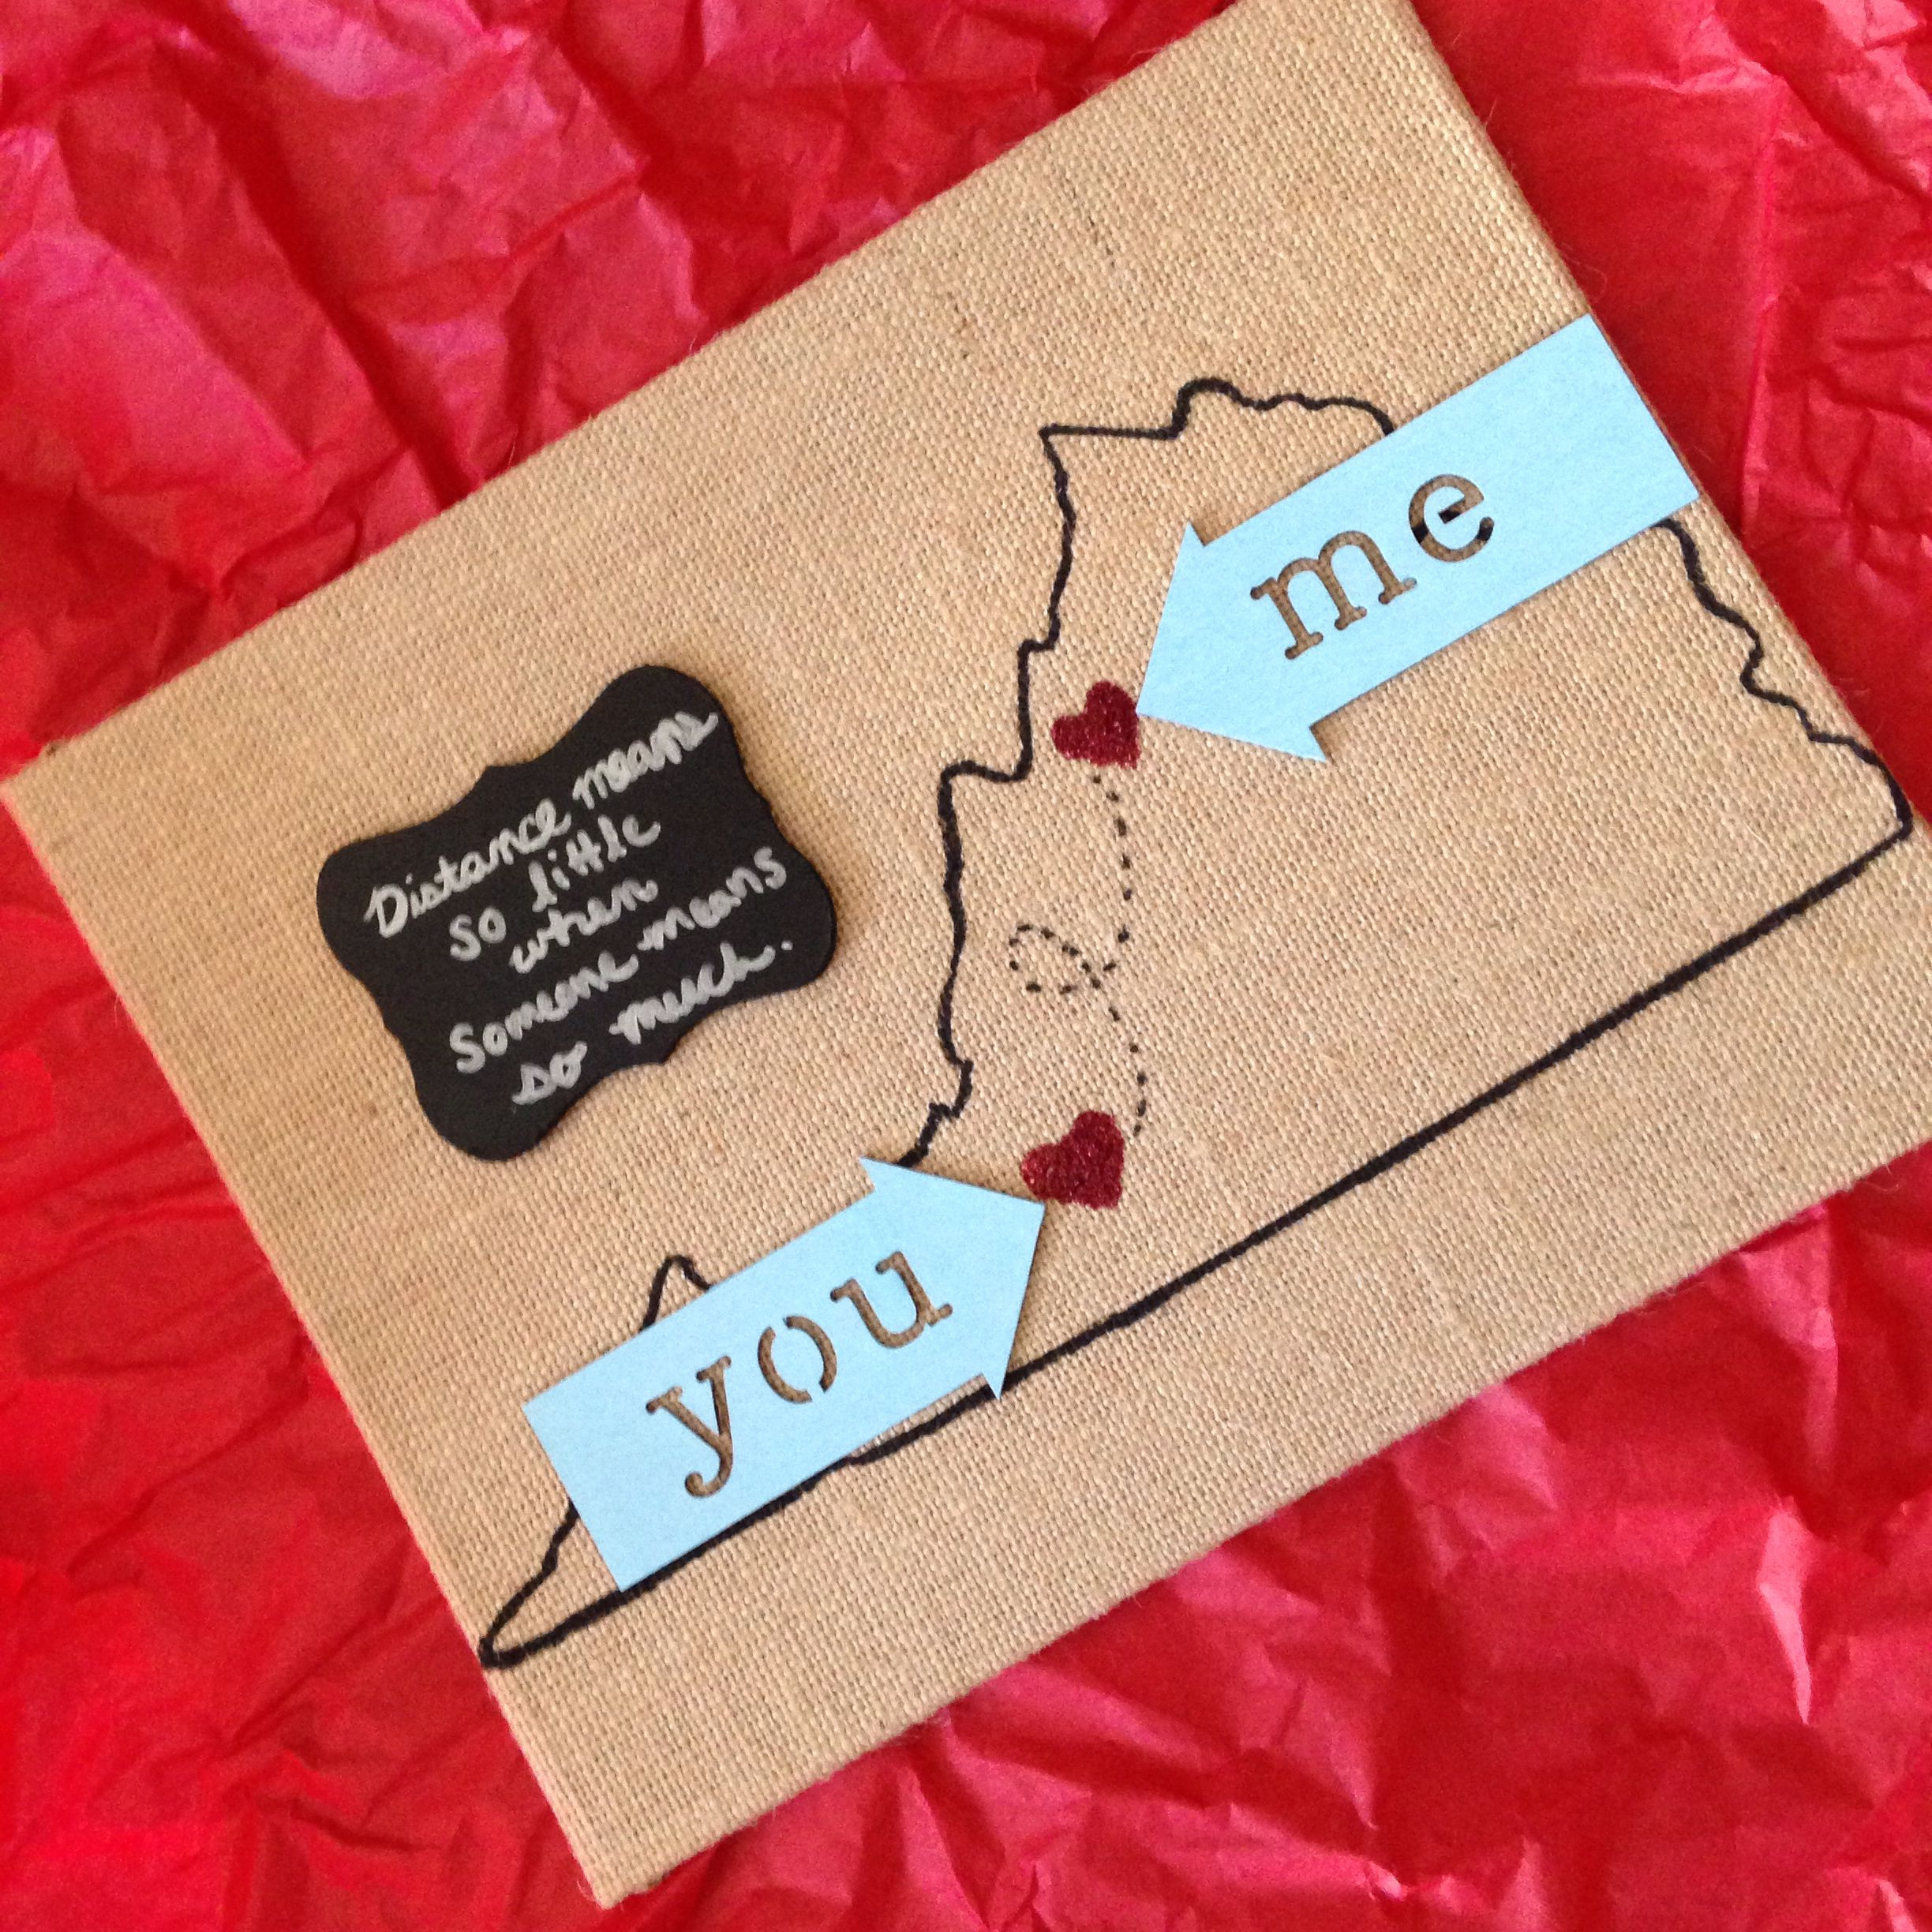 Long Distance Relationship Gift Ideas For Girlfriend
 I m in a long distance relationship & I made this for my